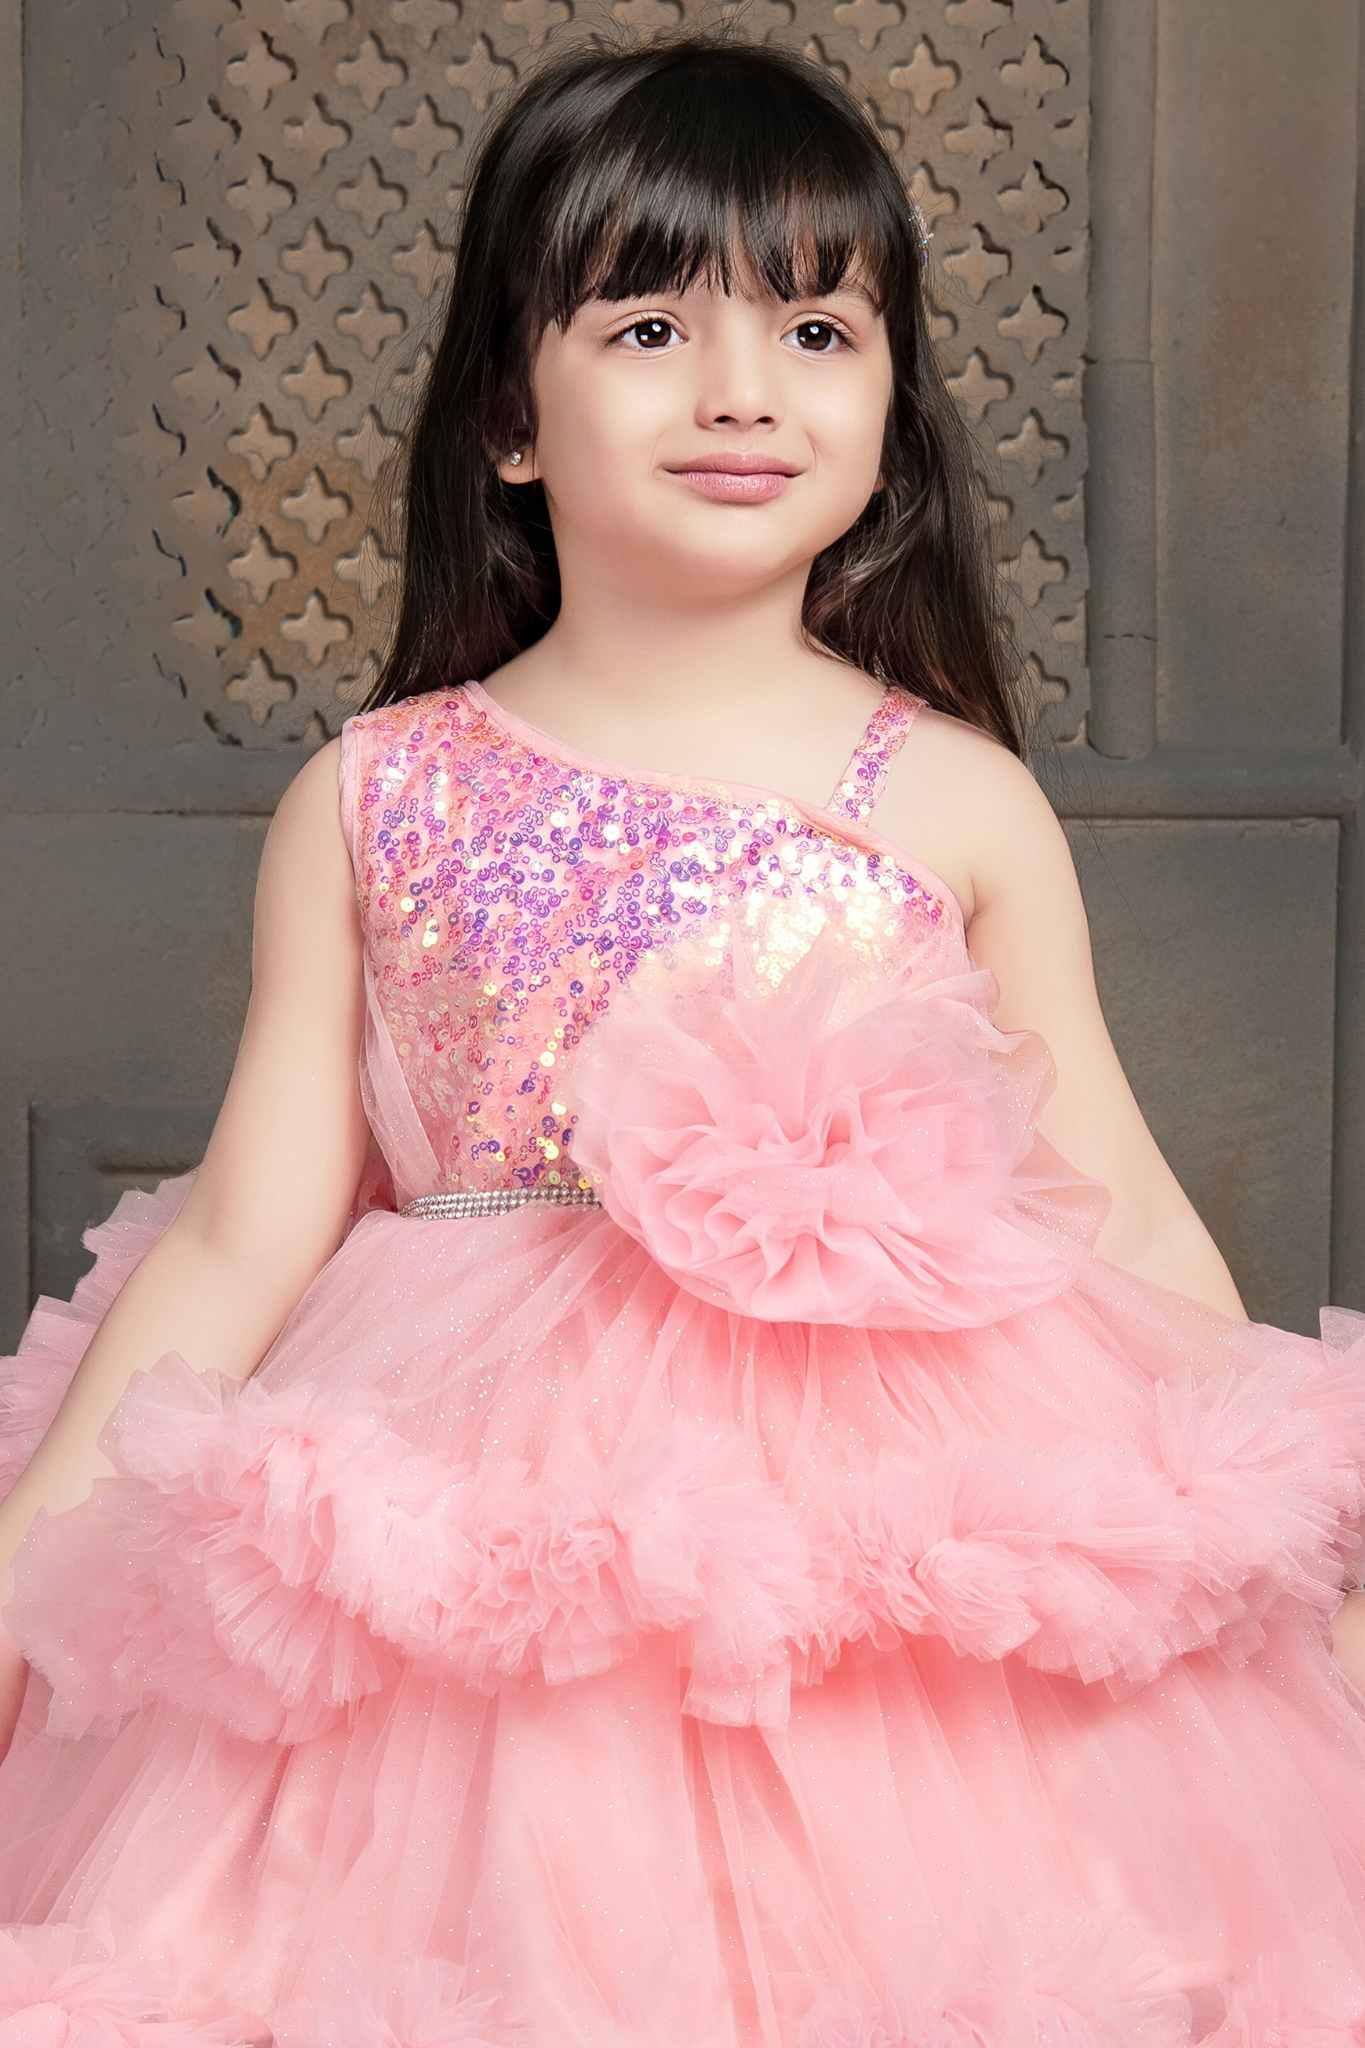 Pink Shimmer Tailback Party Wear Frock With Ruffle Layers For Girls - Lagorii Kids